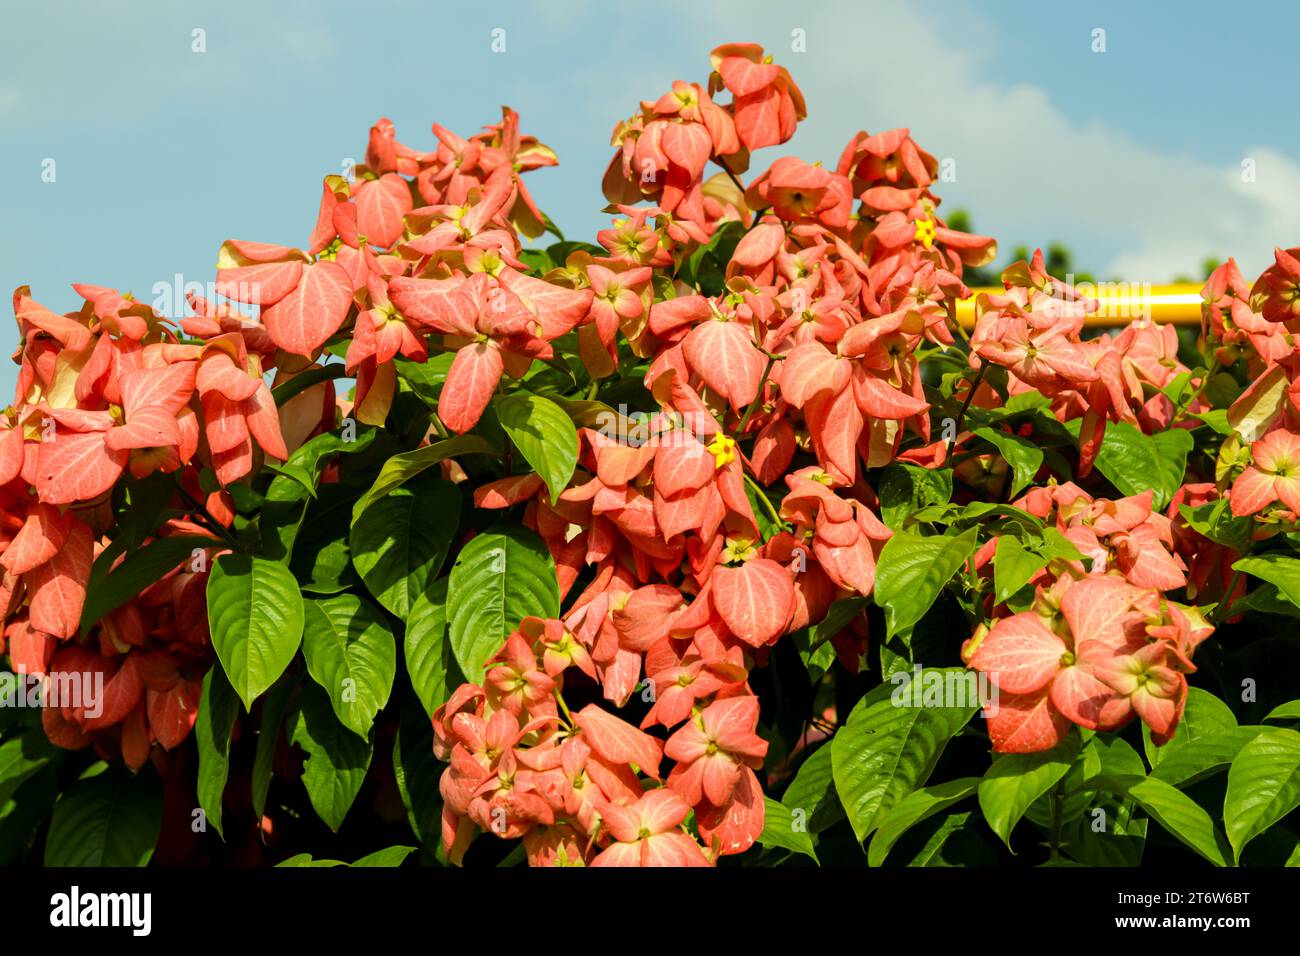 Mussaenda philippica or Queen Sirikit,  orange, yellow, and pink colors flowers Stock Photo